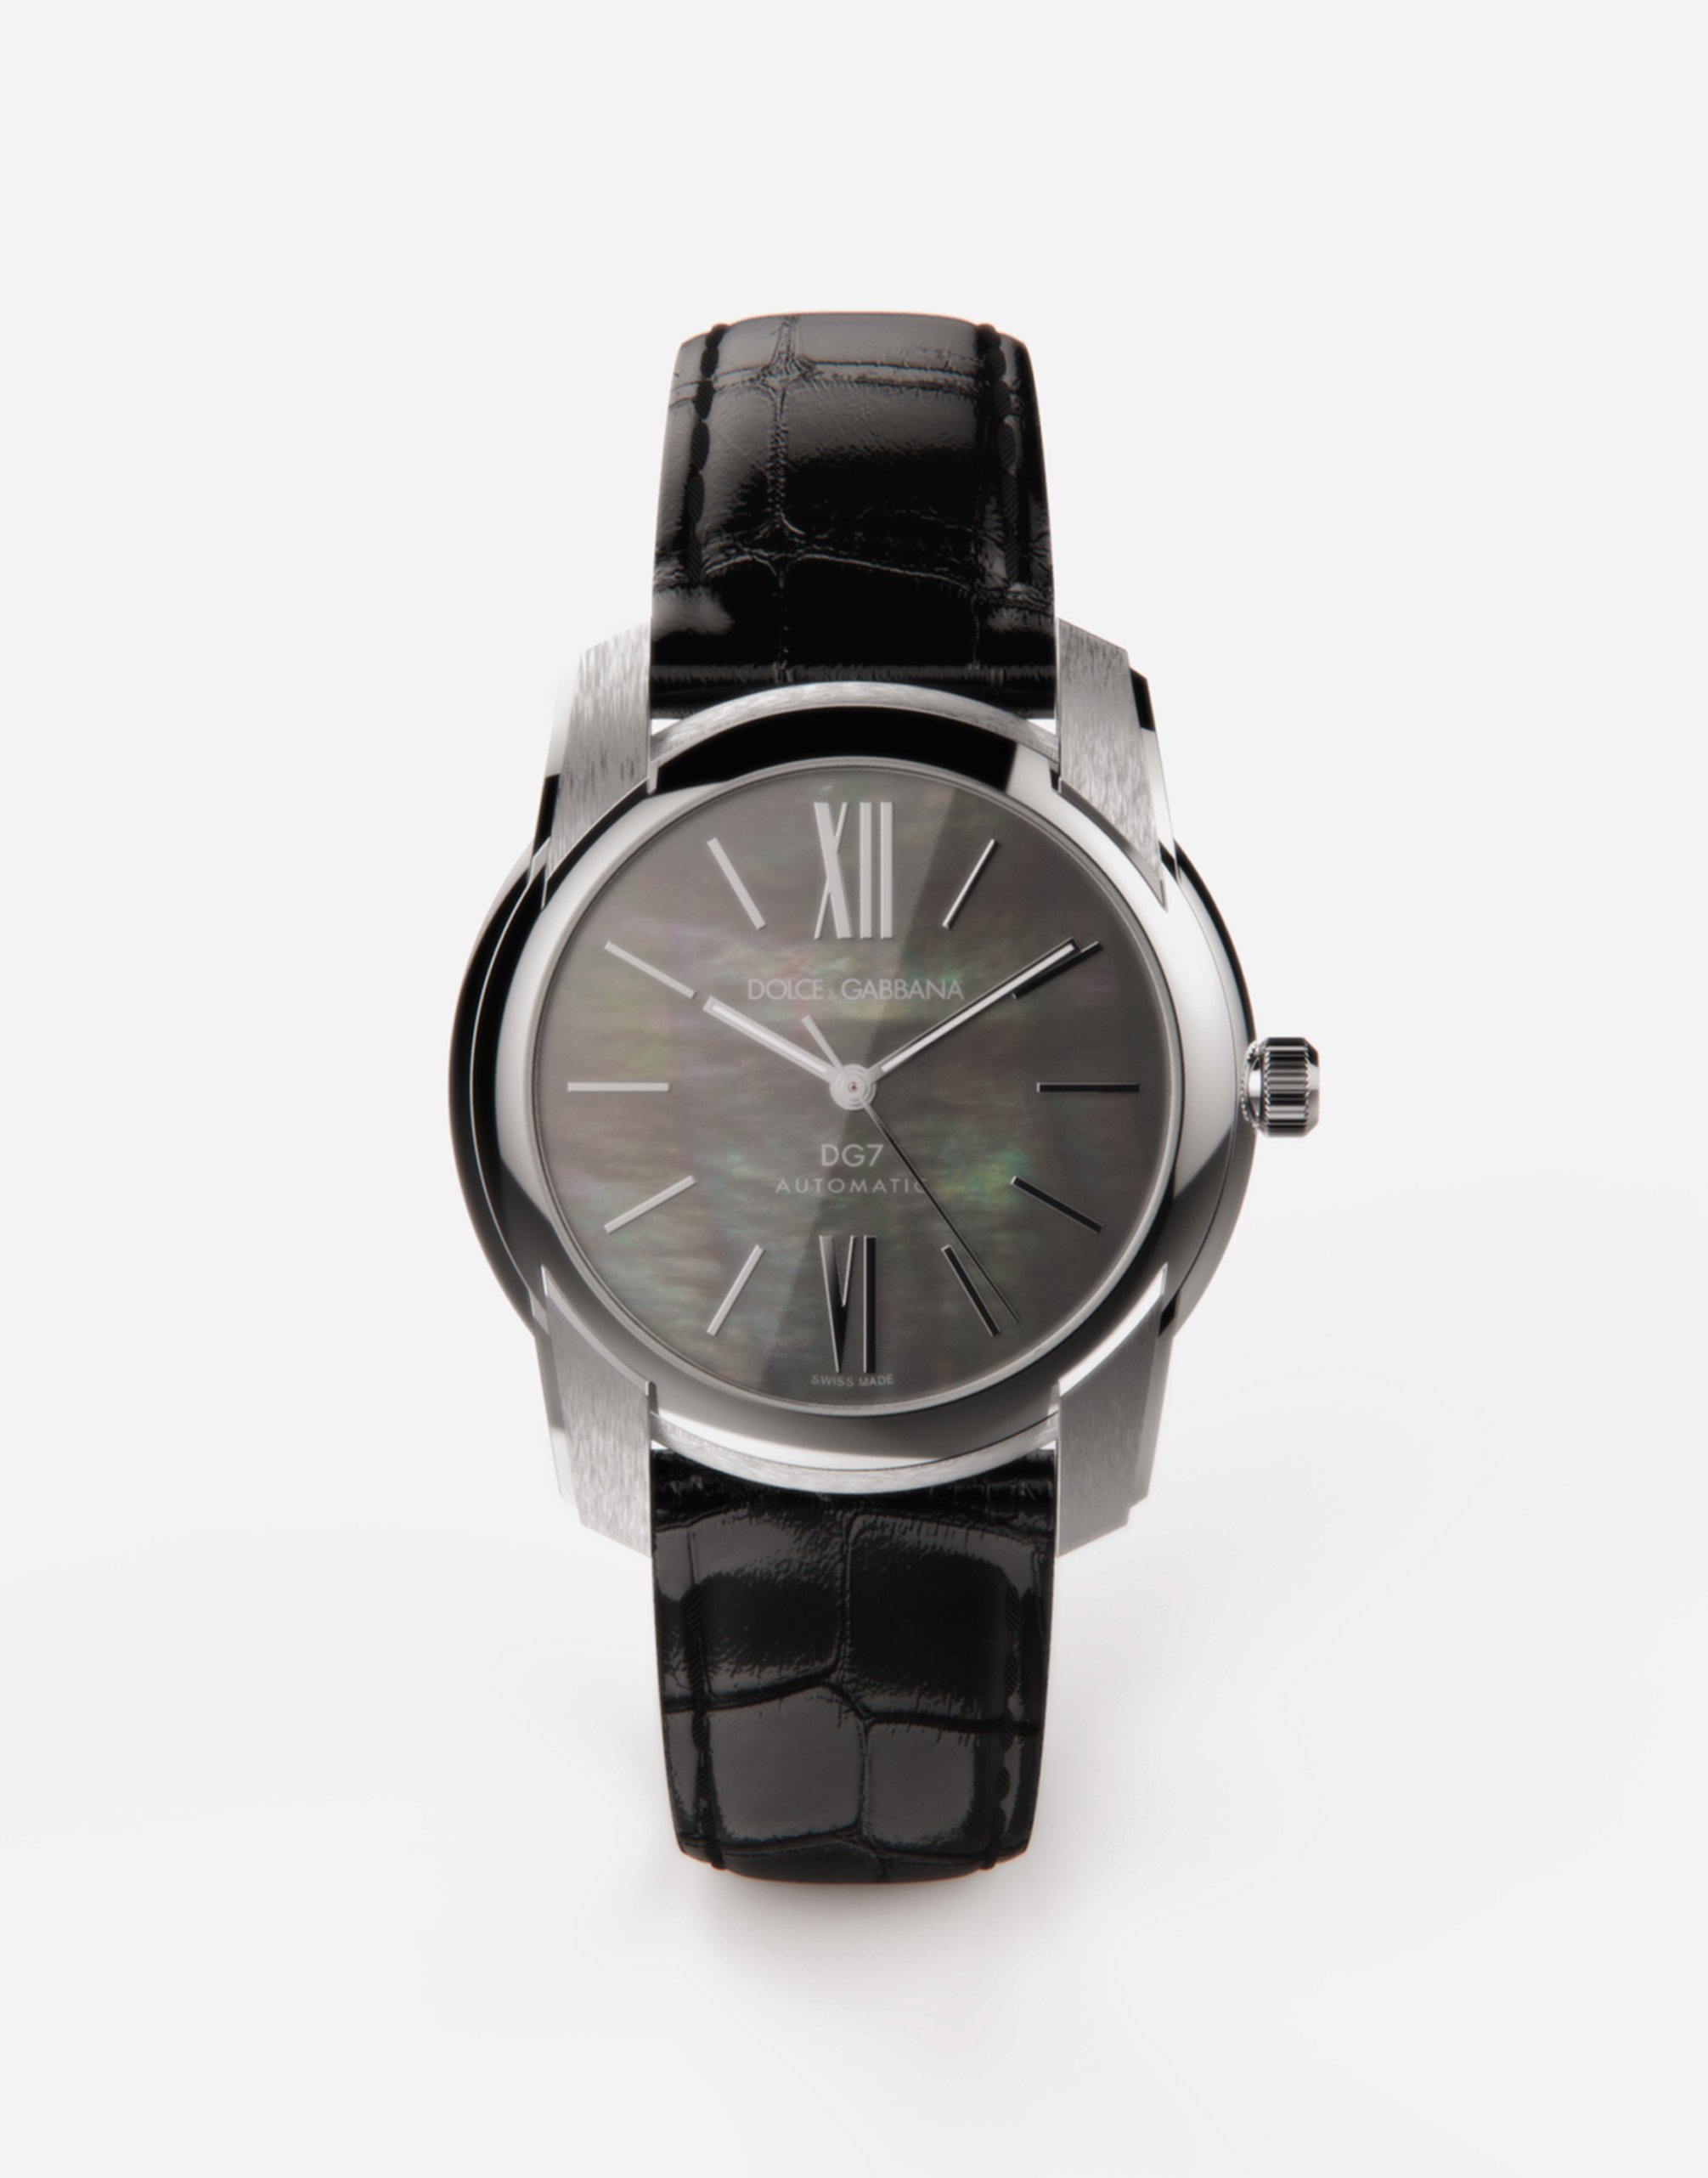 Dolce & Gabbana Dg7 Watch In Steel With Black Mother Of Pearl